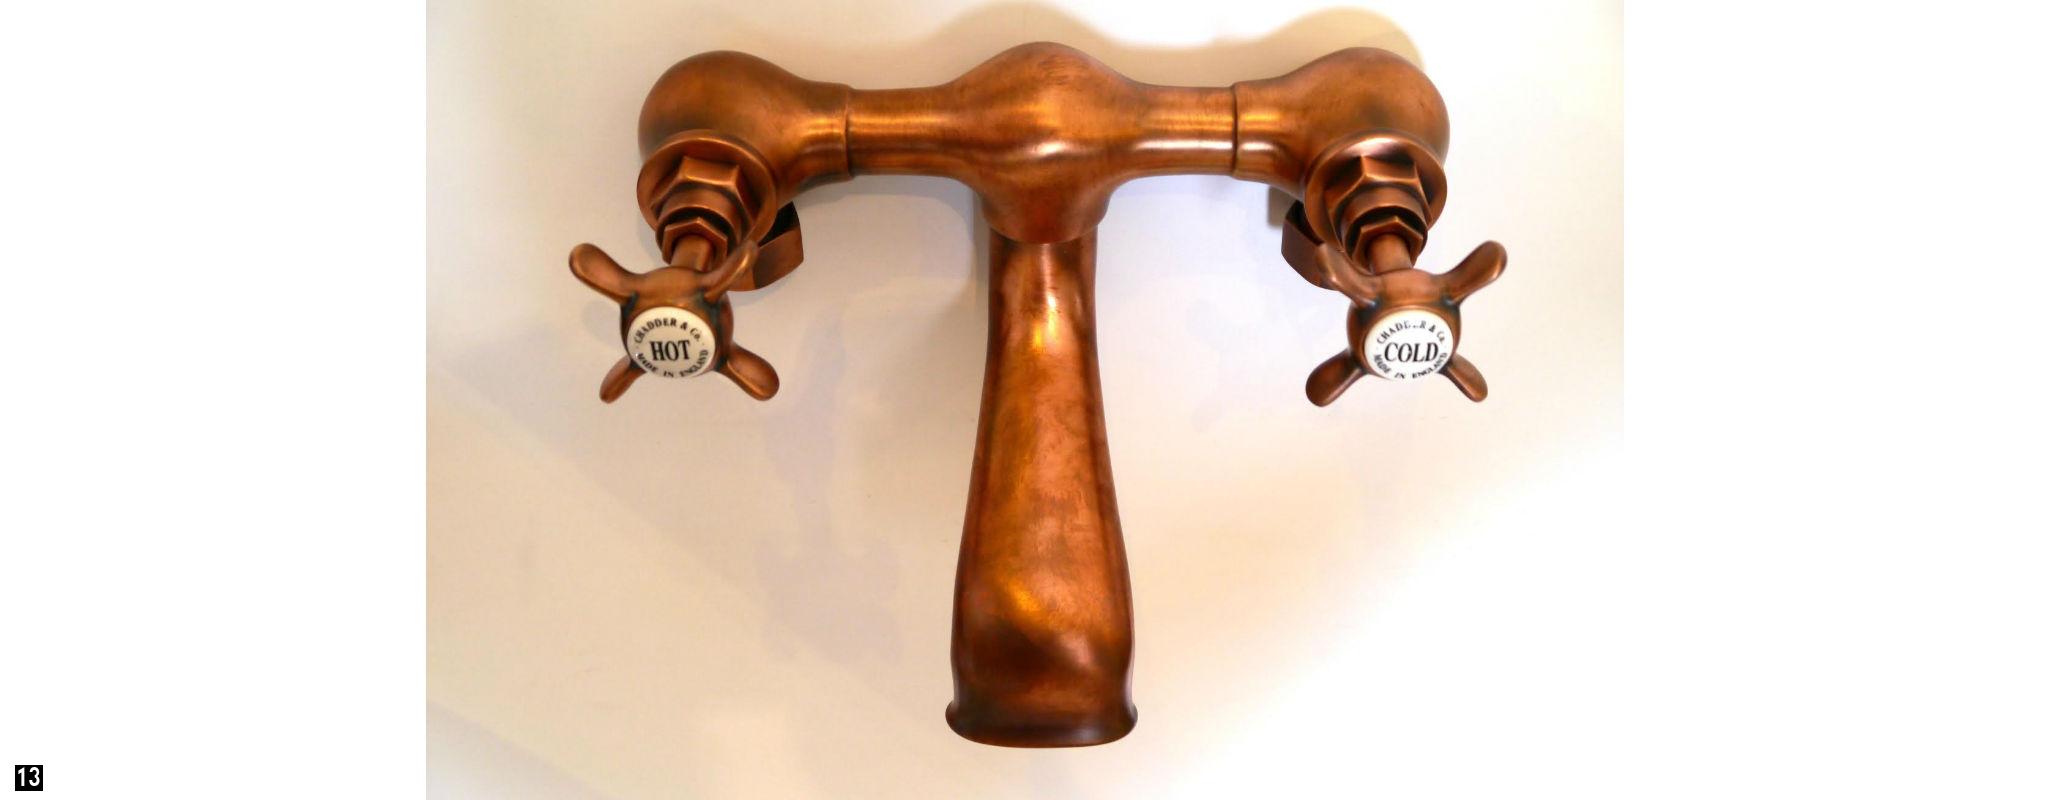 Weathered Copper Bath Taps and Bath Mixers